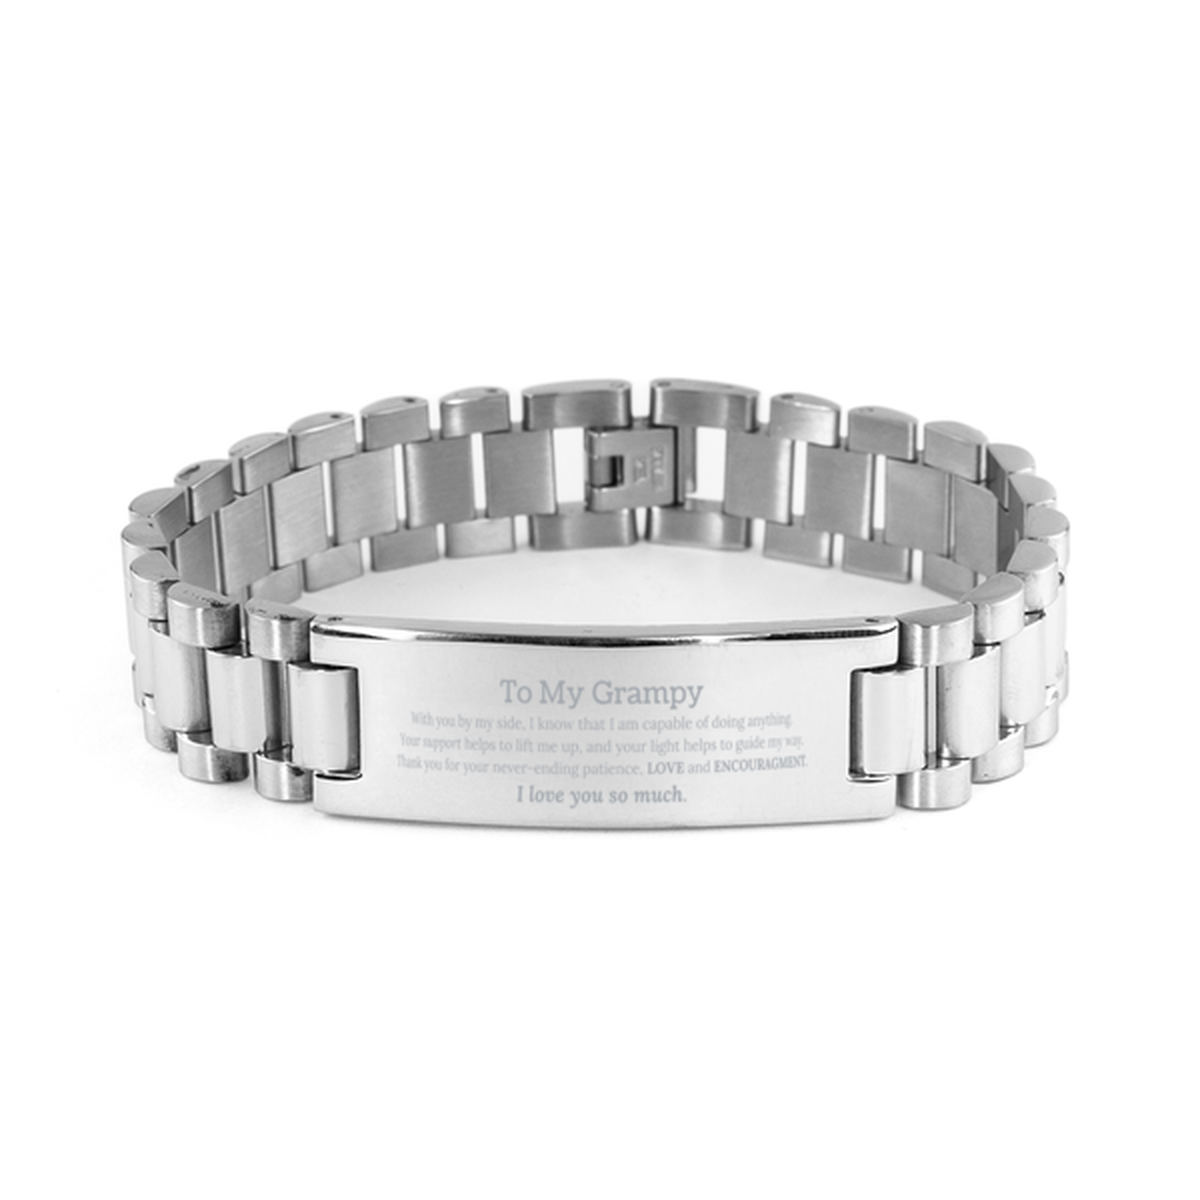 Appreciation Grampy Ladder Stainless Steel Bracelet Gifts, To My Grampy Birthday Christmas Wedding Keepsake Gifts for Grampy With you by my side, I know that I am capable of doing anything. I love you so much